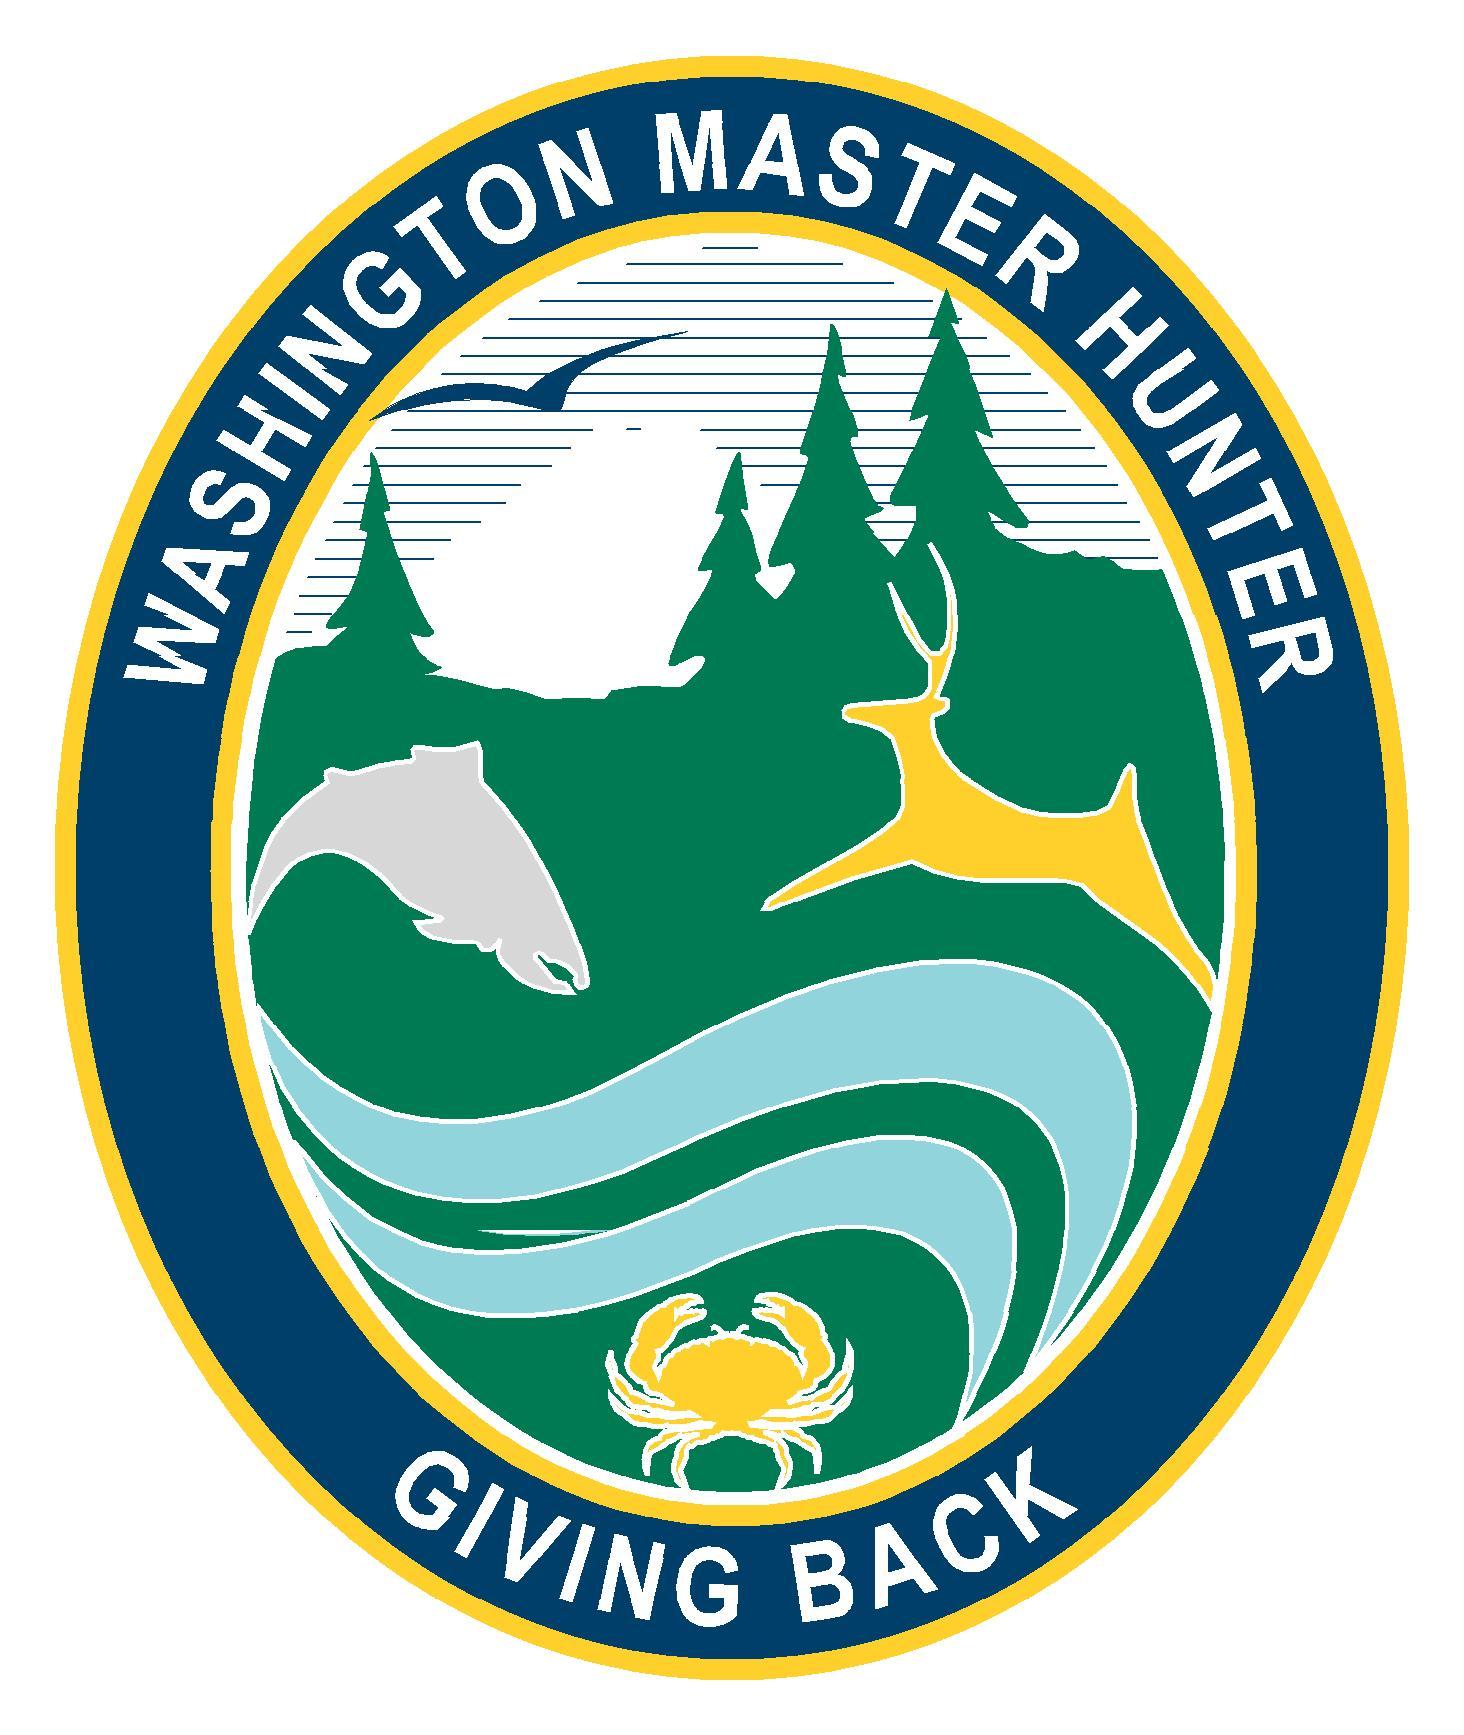 A circular WDFW logo surrounded by the words "Washington Master Hunter," "Giving Back" in the margins.